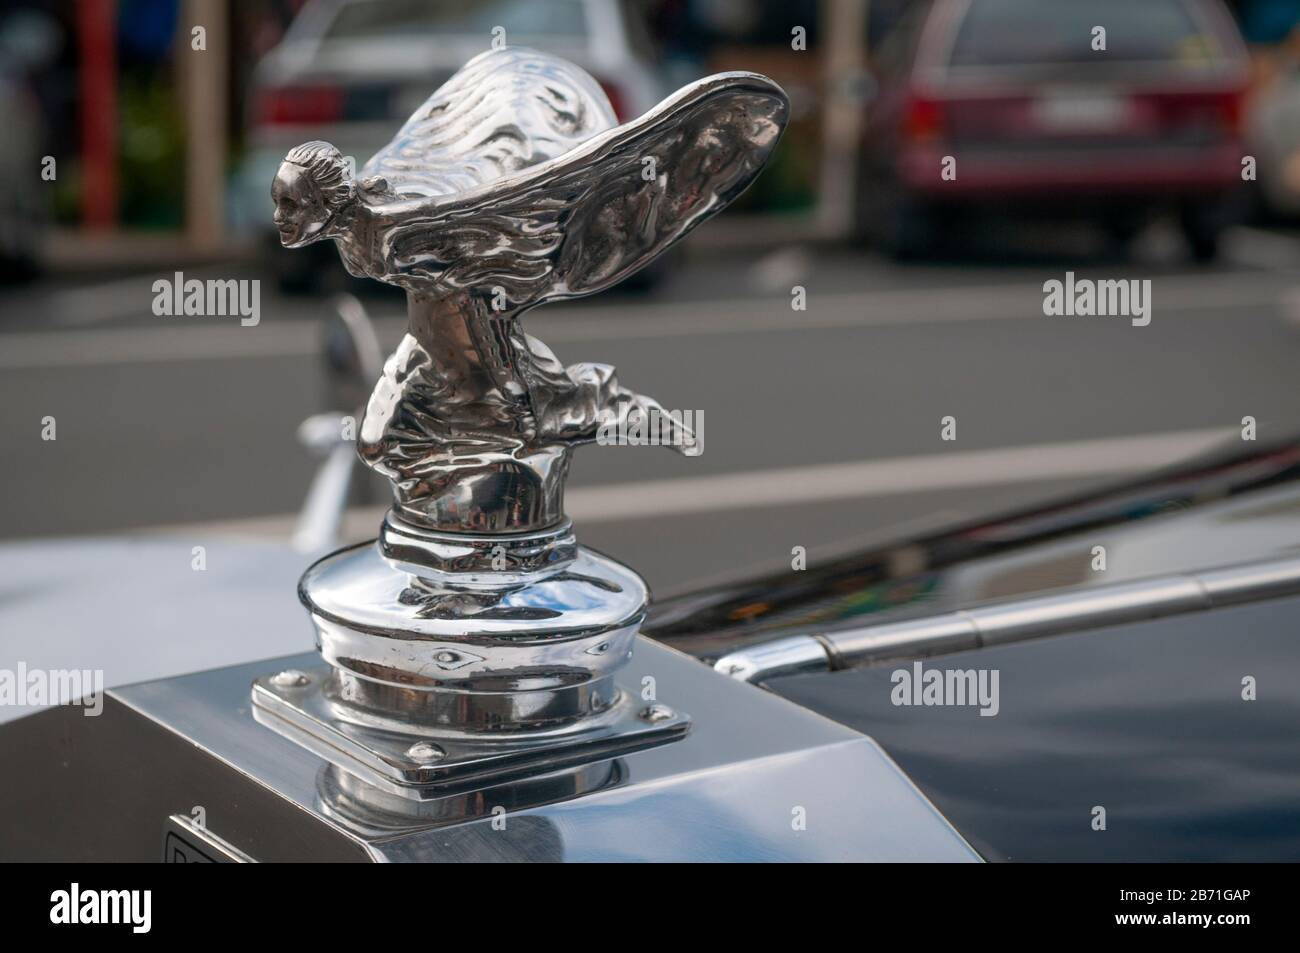 Spirit of Ecstasy' hood ornament on a Rolls Royce silver ghost limousine,  photographed in Thames, New Zealand on the Coromandel coast Stock Photo -  Alamy